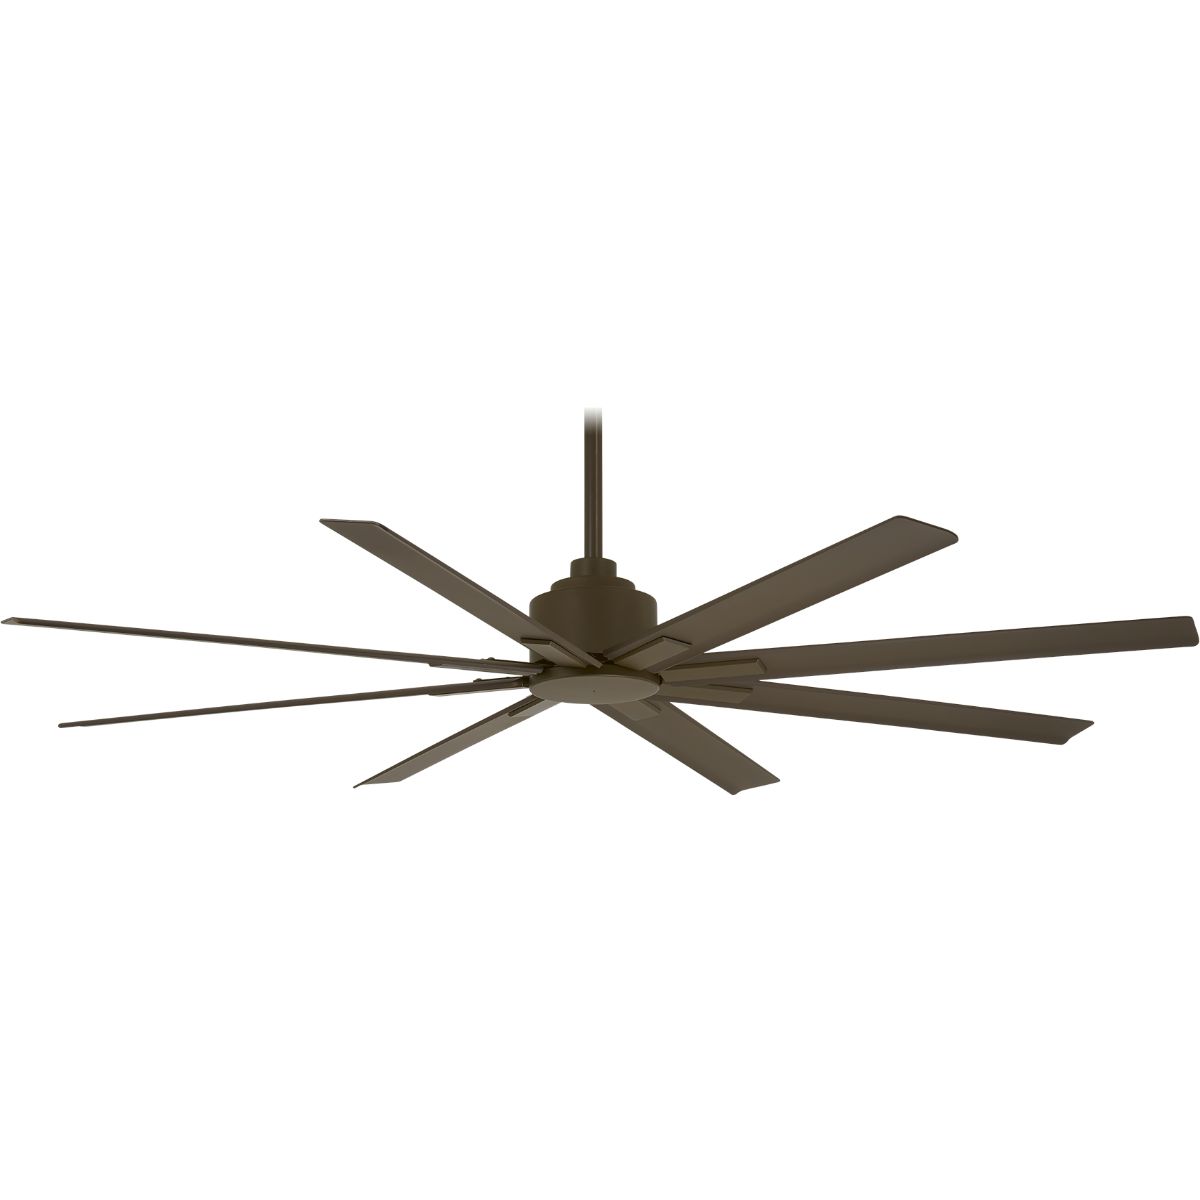 Xtreme H2O 65 Inch Windmill Outdoor Ceiling Fan With Remote